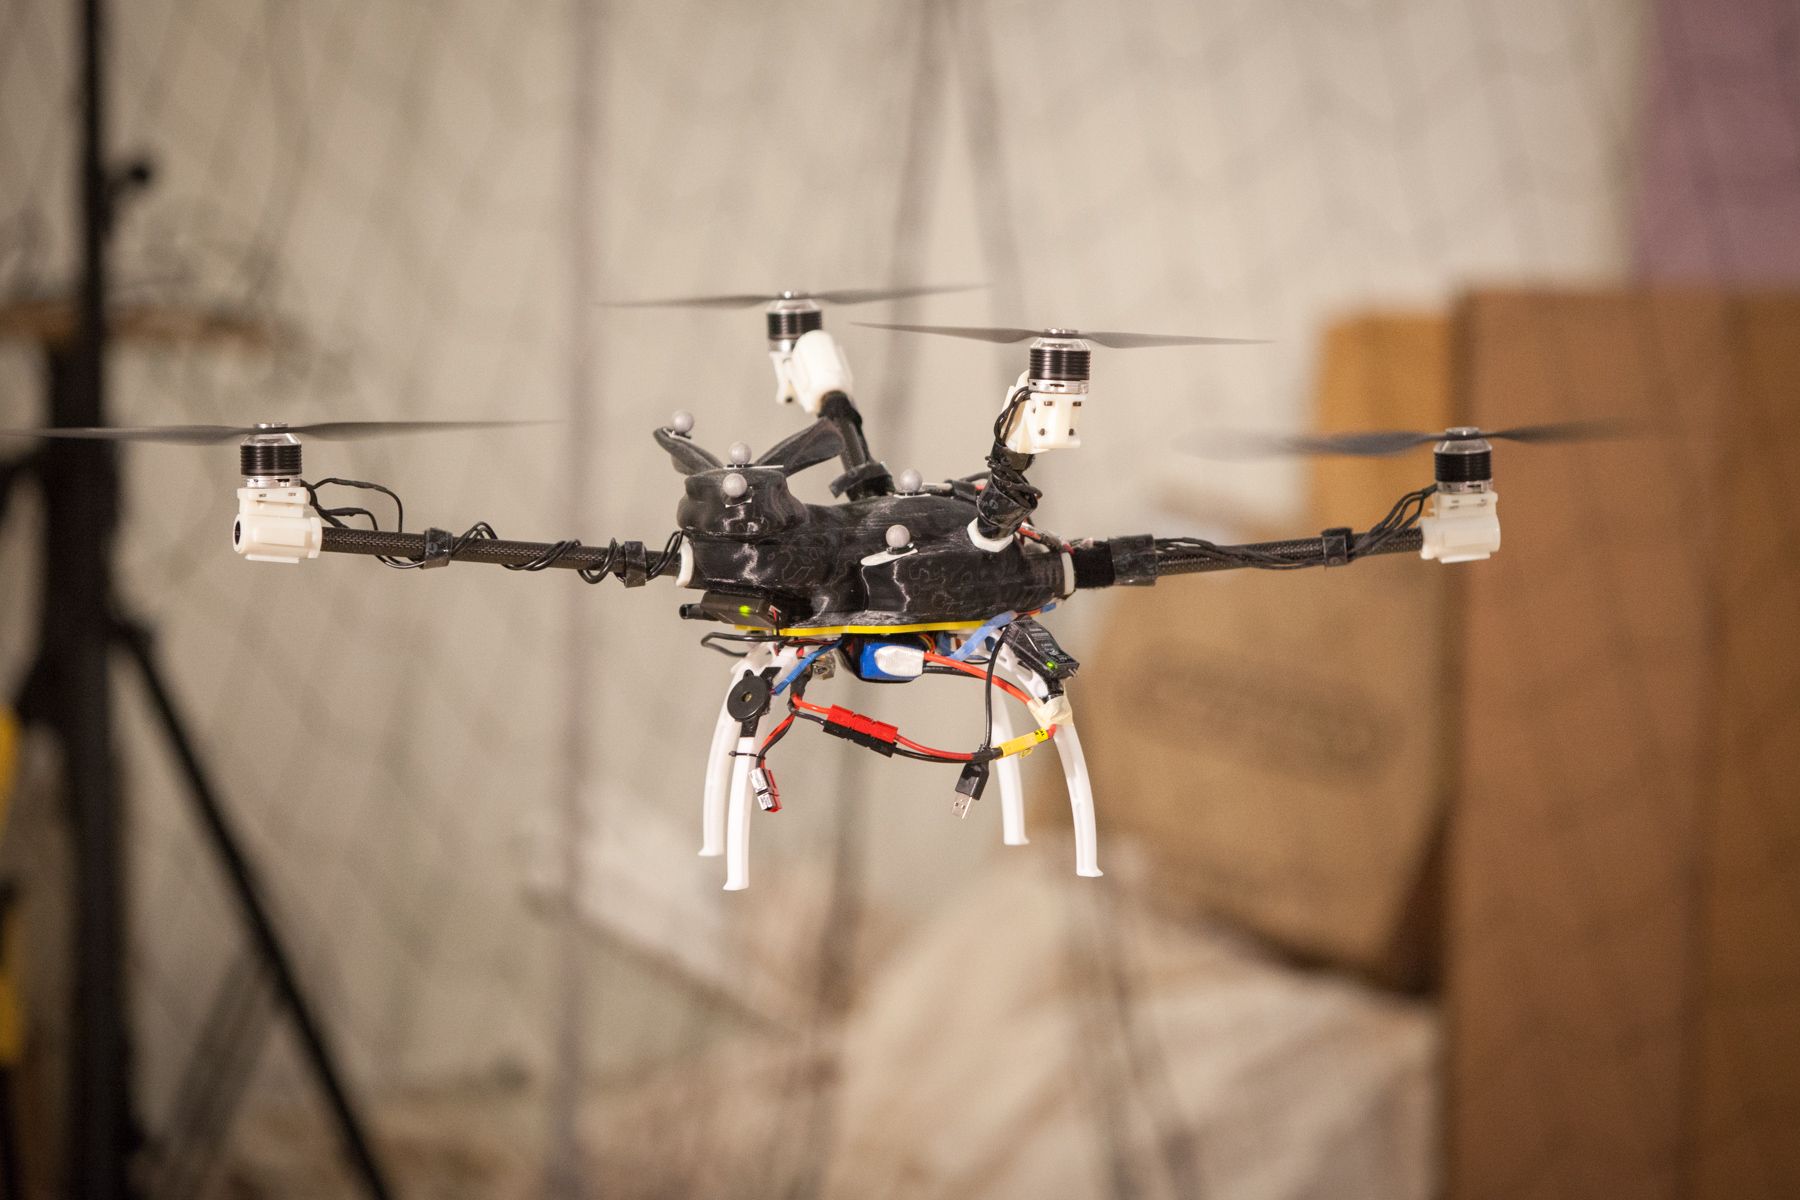 Design your own custom drone, MIT News